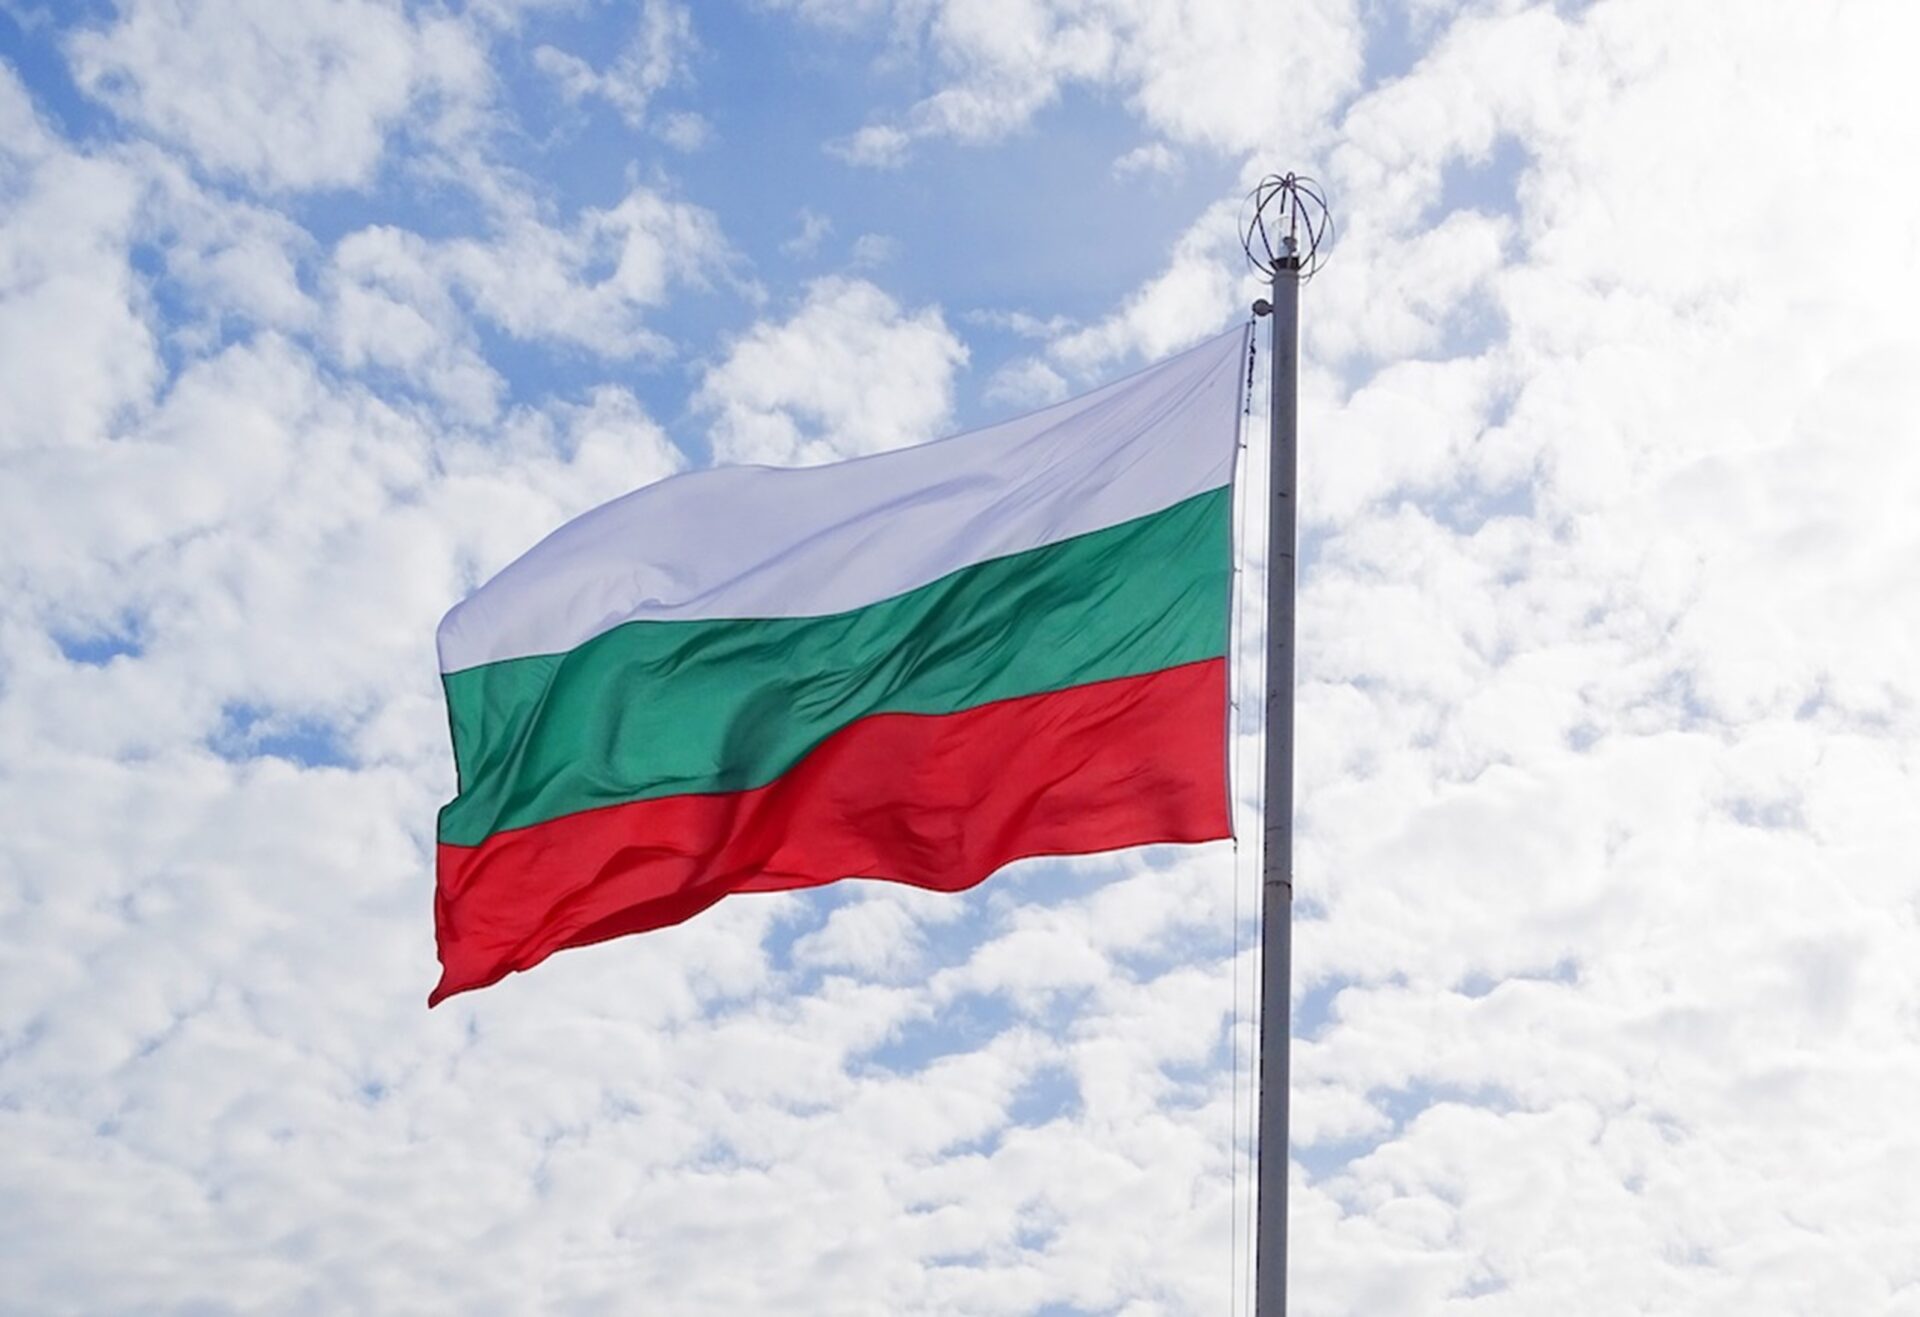 Bulgaria: Celebrates the 145th anniversary of liberation from Ottoman rule